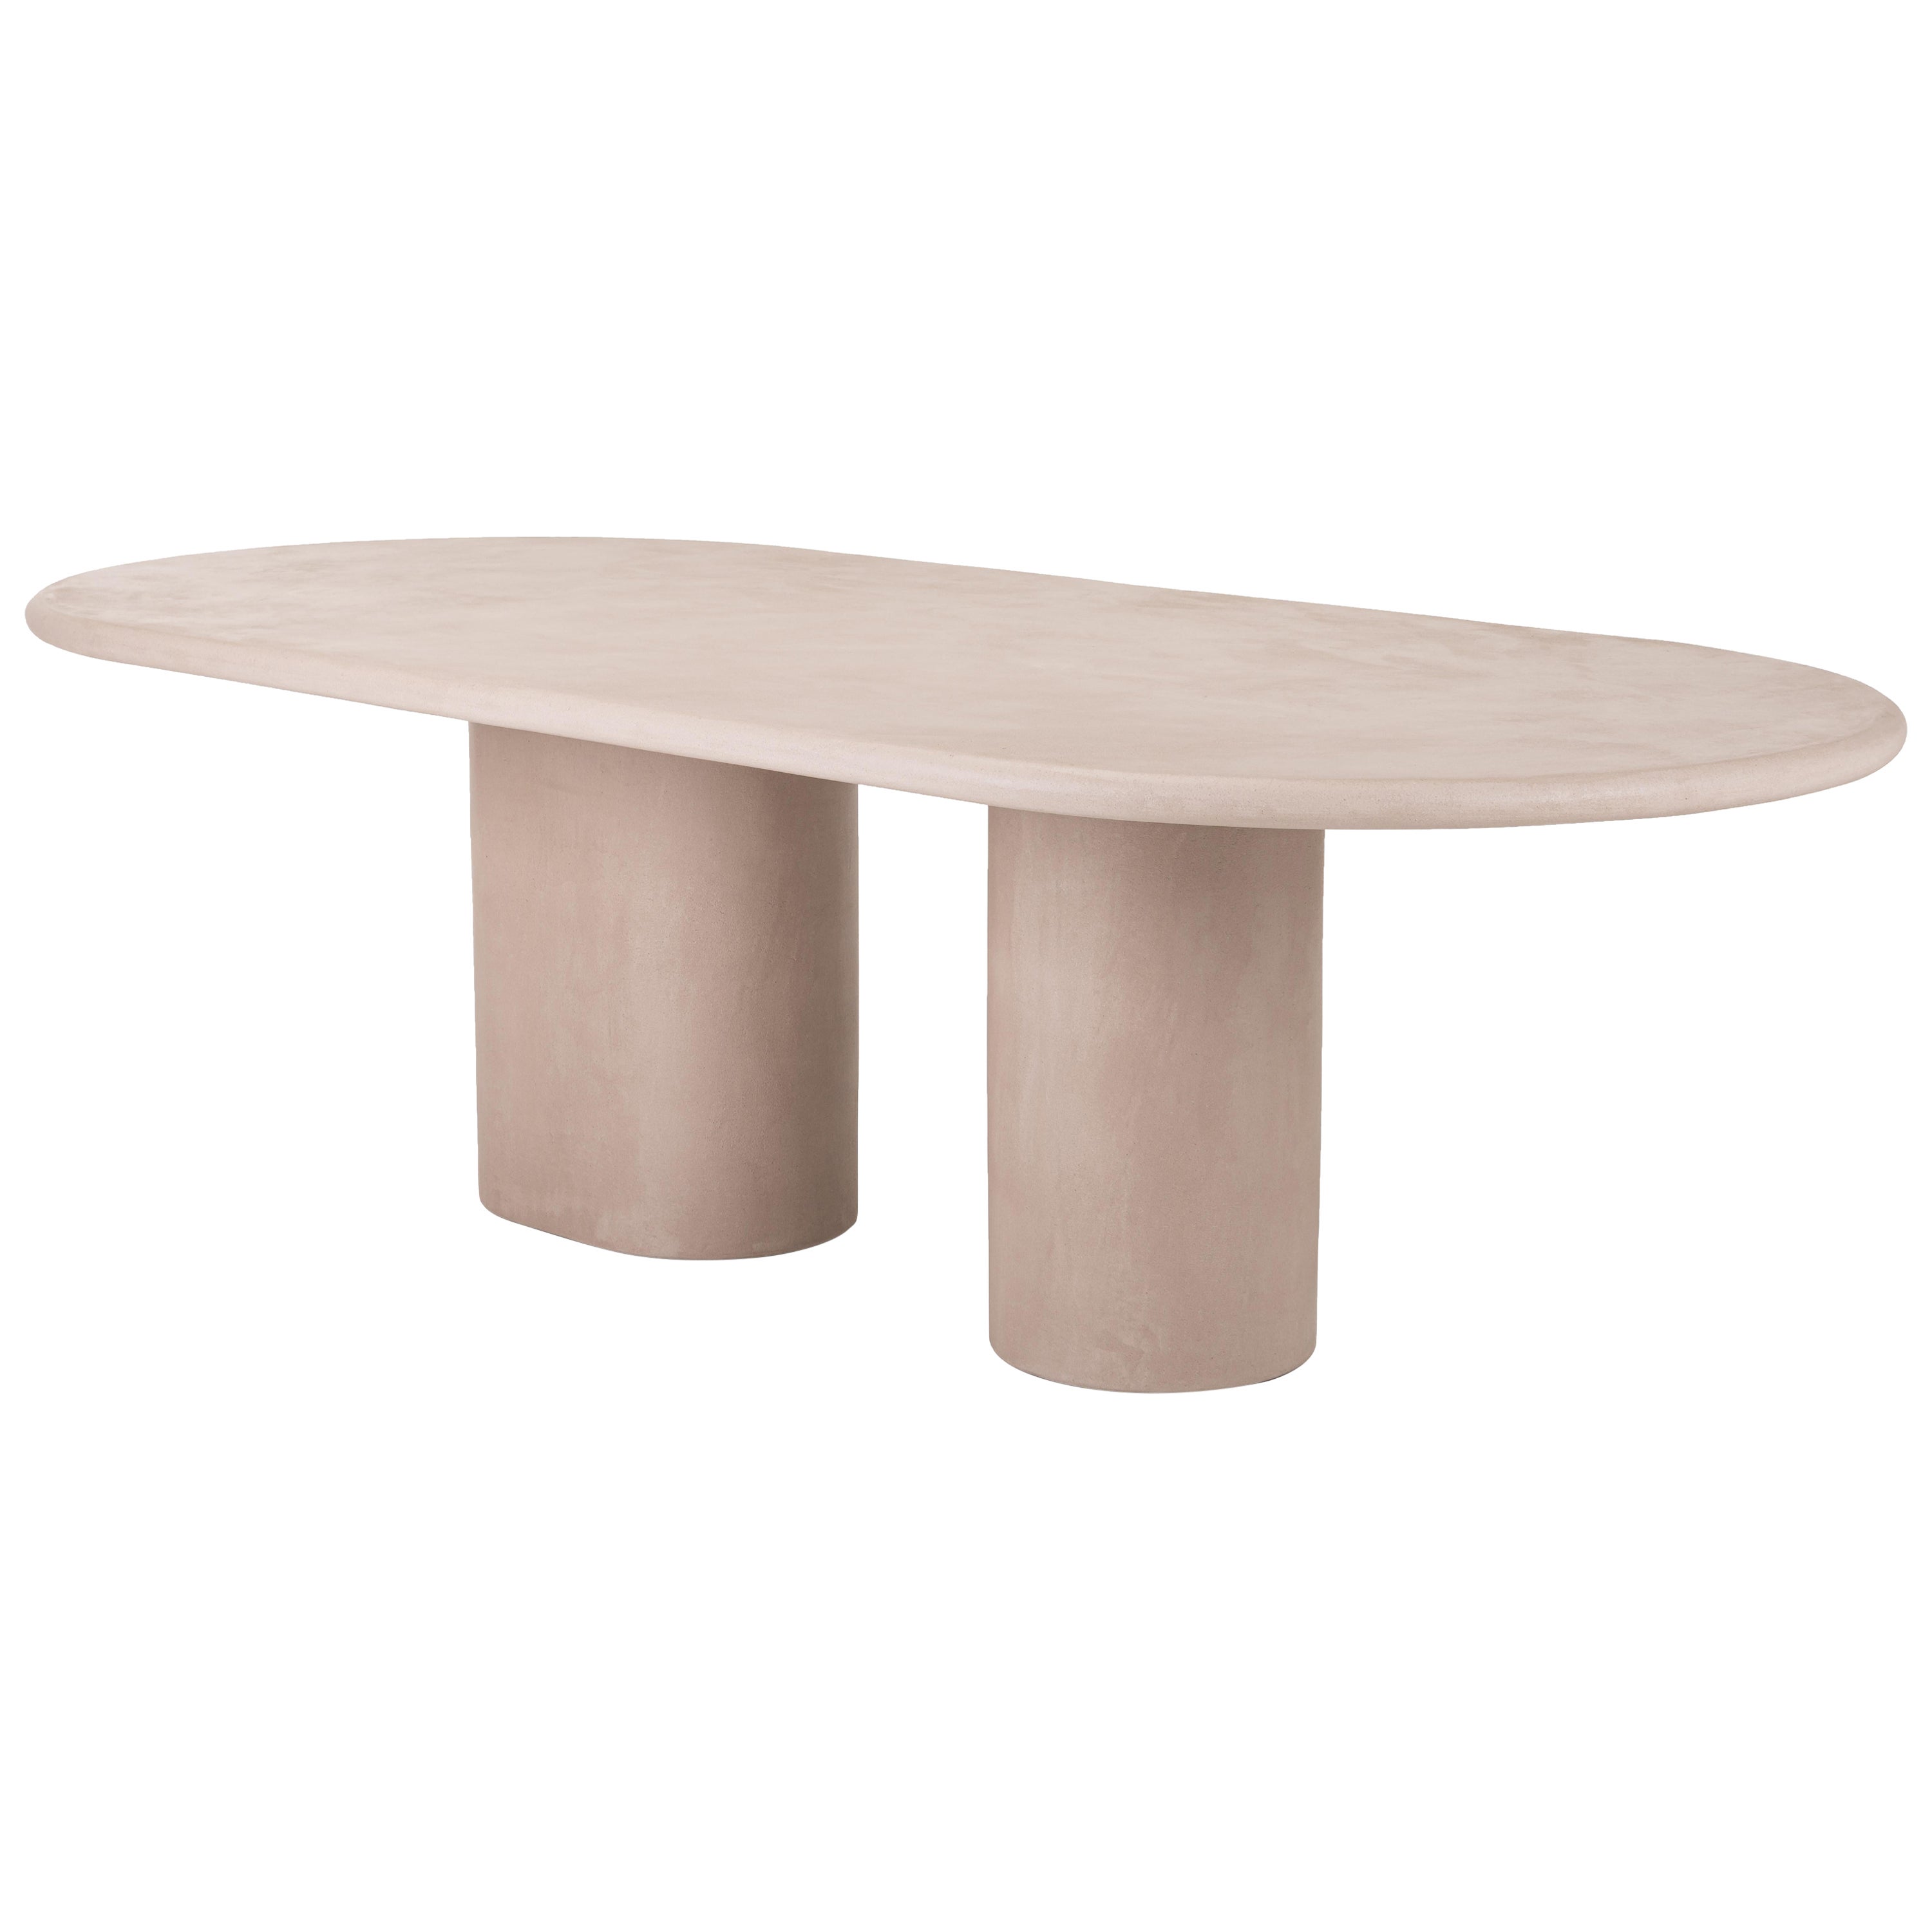 Natural Plaster Dining Table "Column" 300 by Isabelle Beaumont For Sale